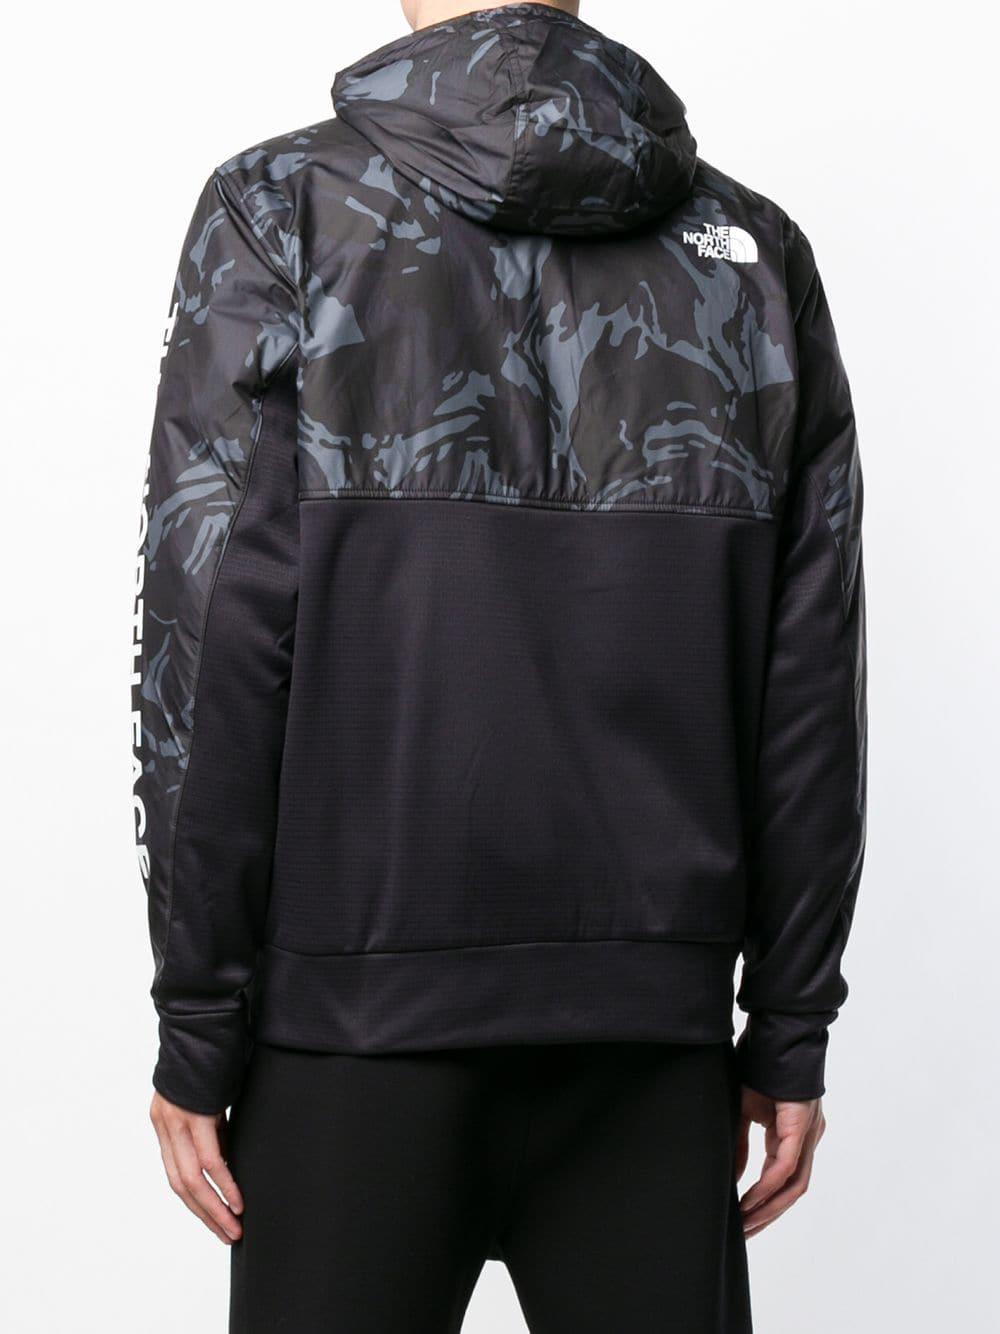 The North Face Train N Logo Overlay Jacket in Black for Men - Lyst